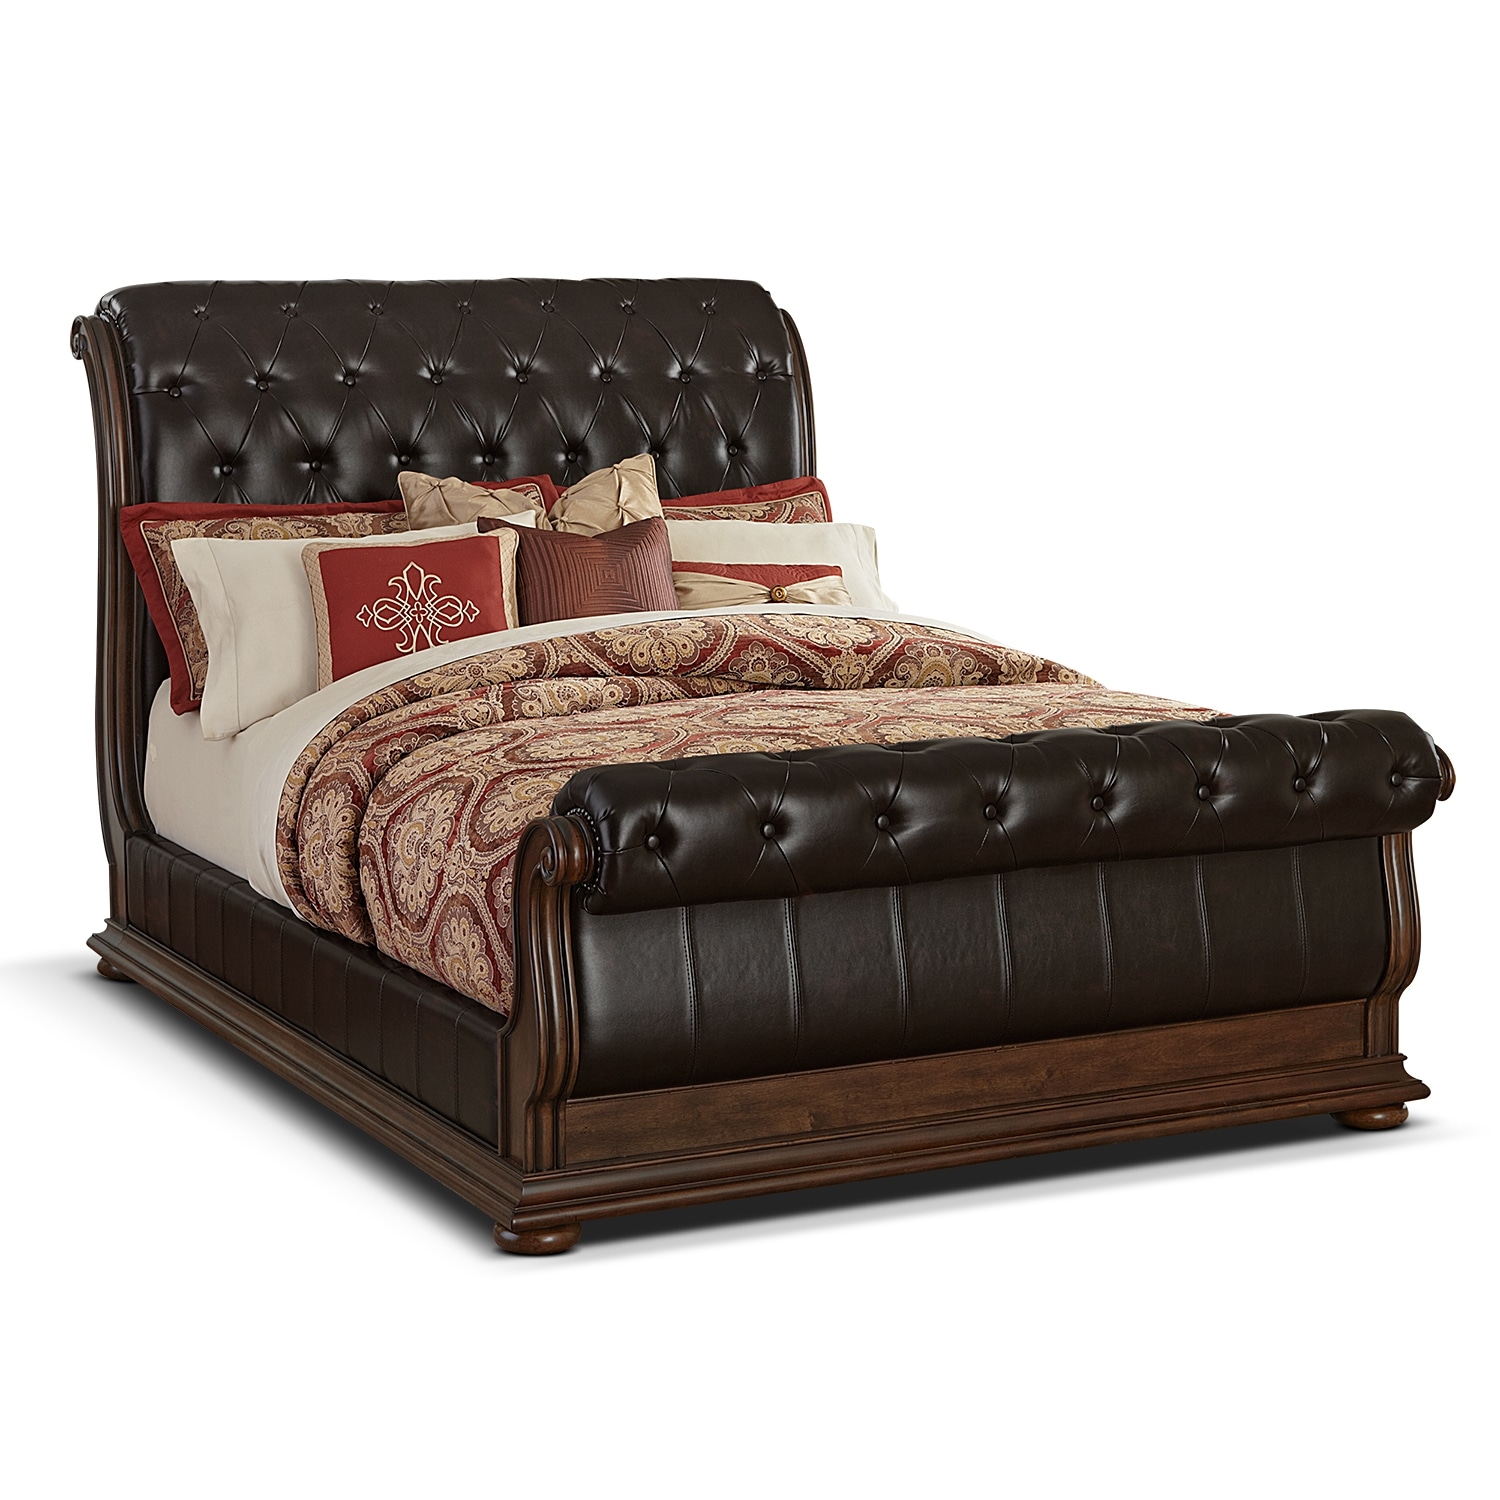 Monticello Pecan Upholstered Sleigh Bed | Value City Furniture and